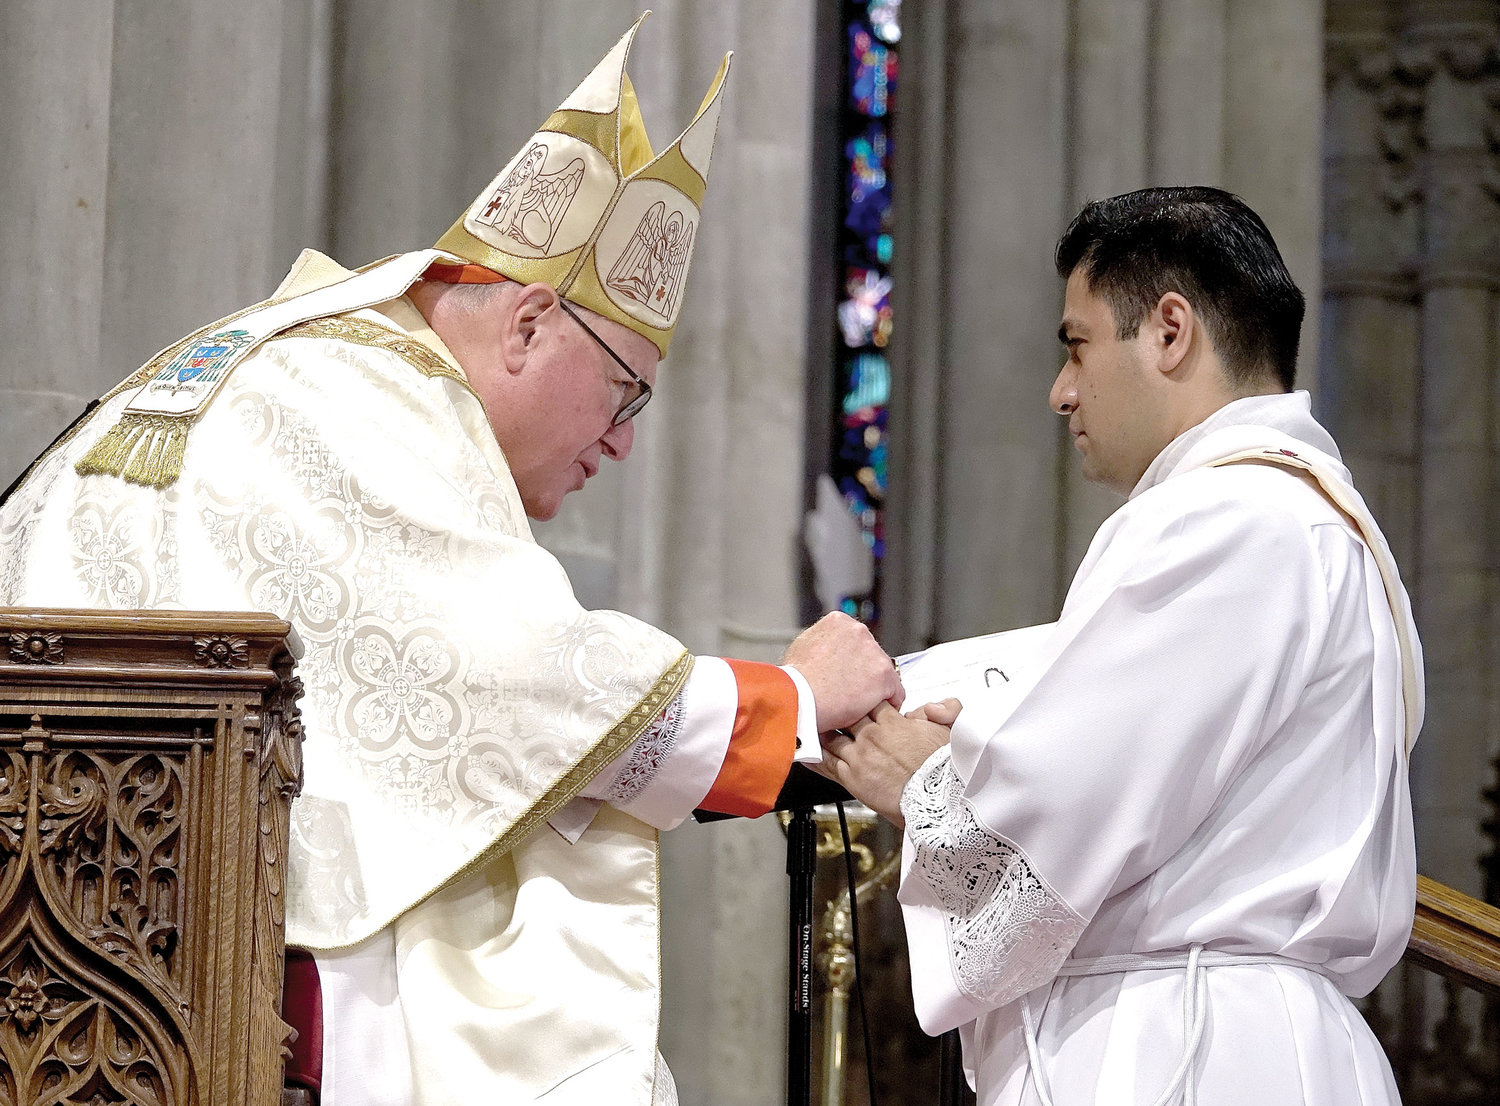 Cardinal Dolan served as principal celebrant at the Mass of Ordination of Priests June 26 at St. Patrick’s Cathedral. One of the new priests is Father Luis M. Silva Cervantes, a native of Mexico, ordained for the Archdiocese of New York.